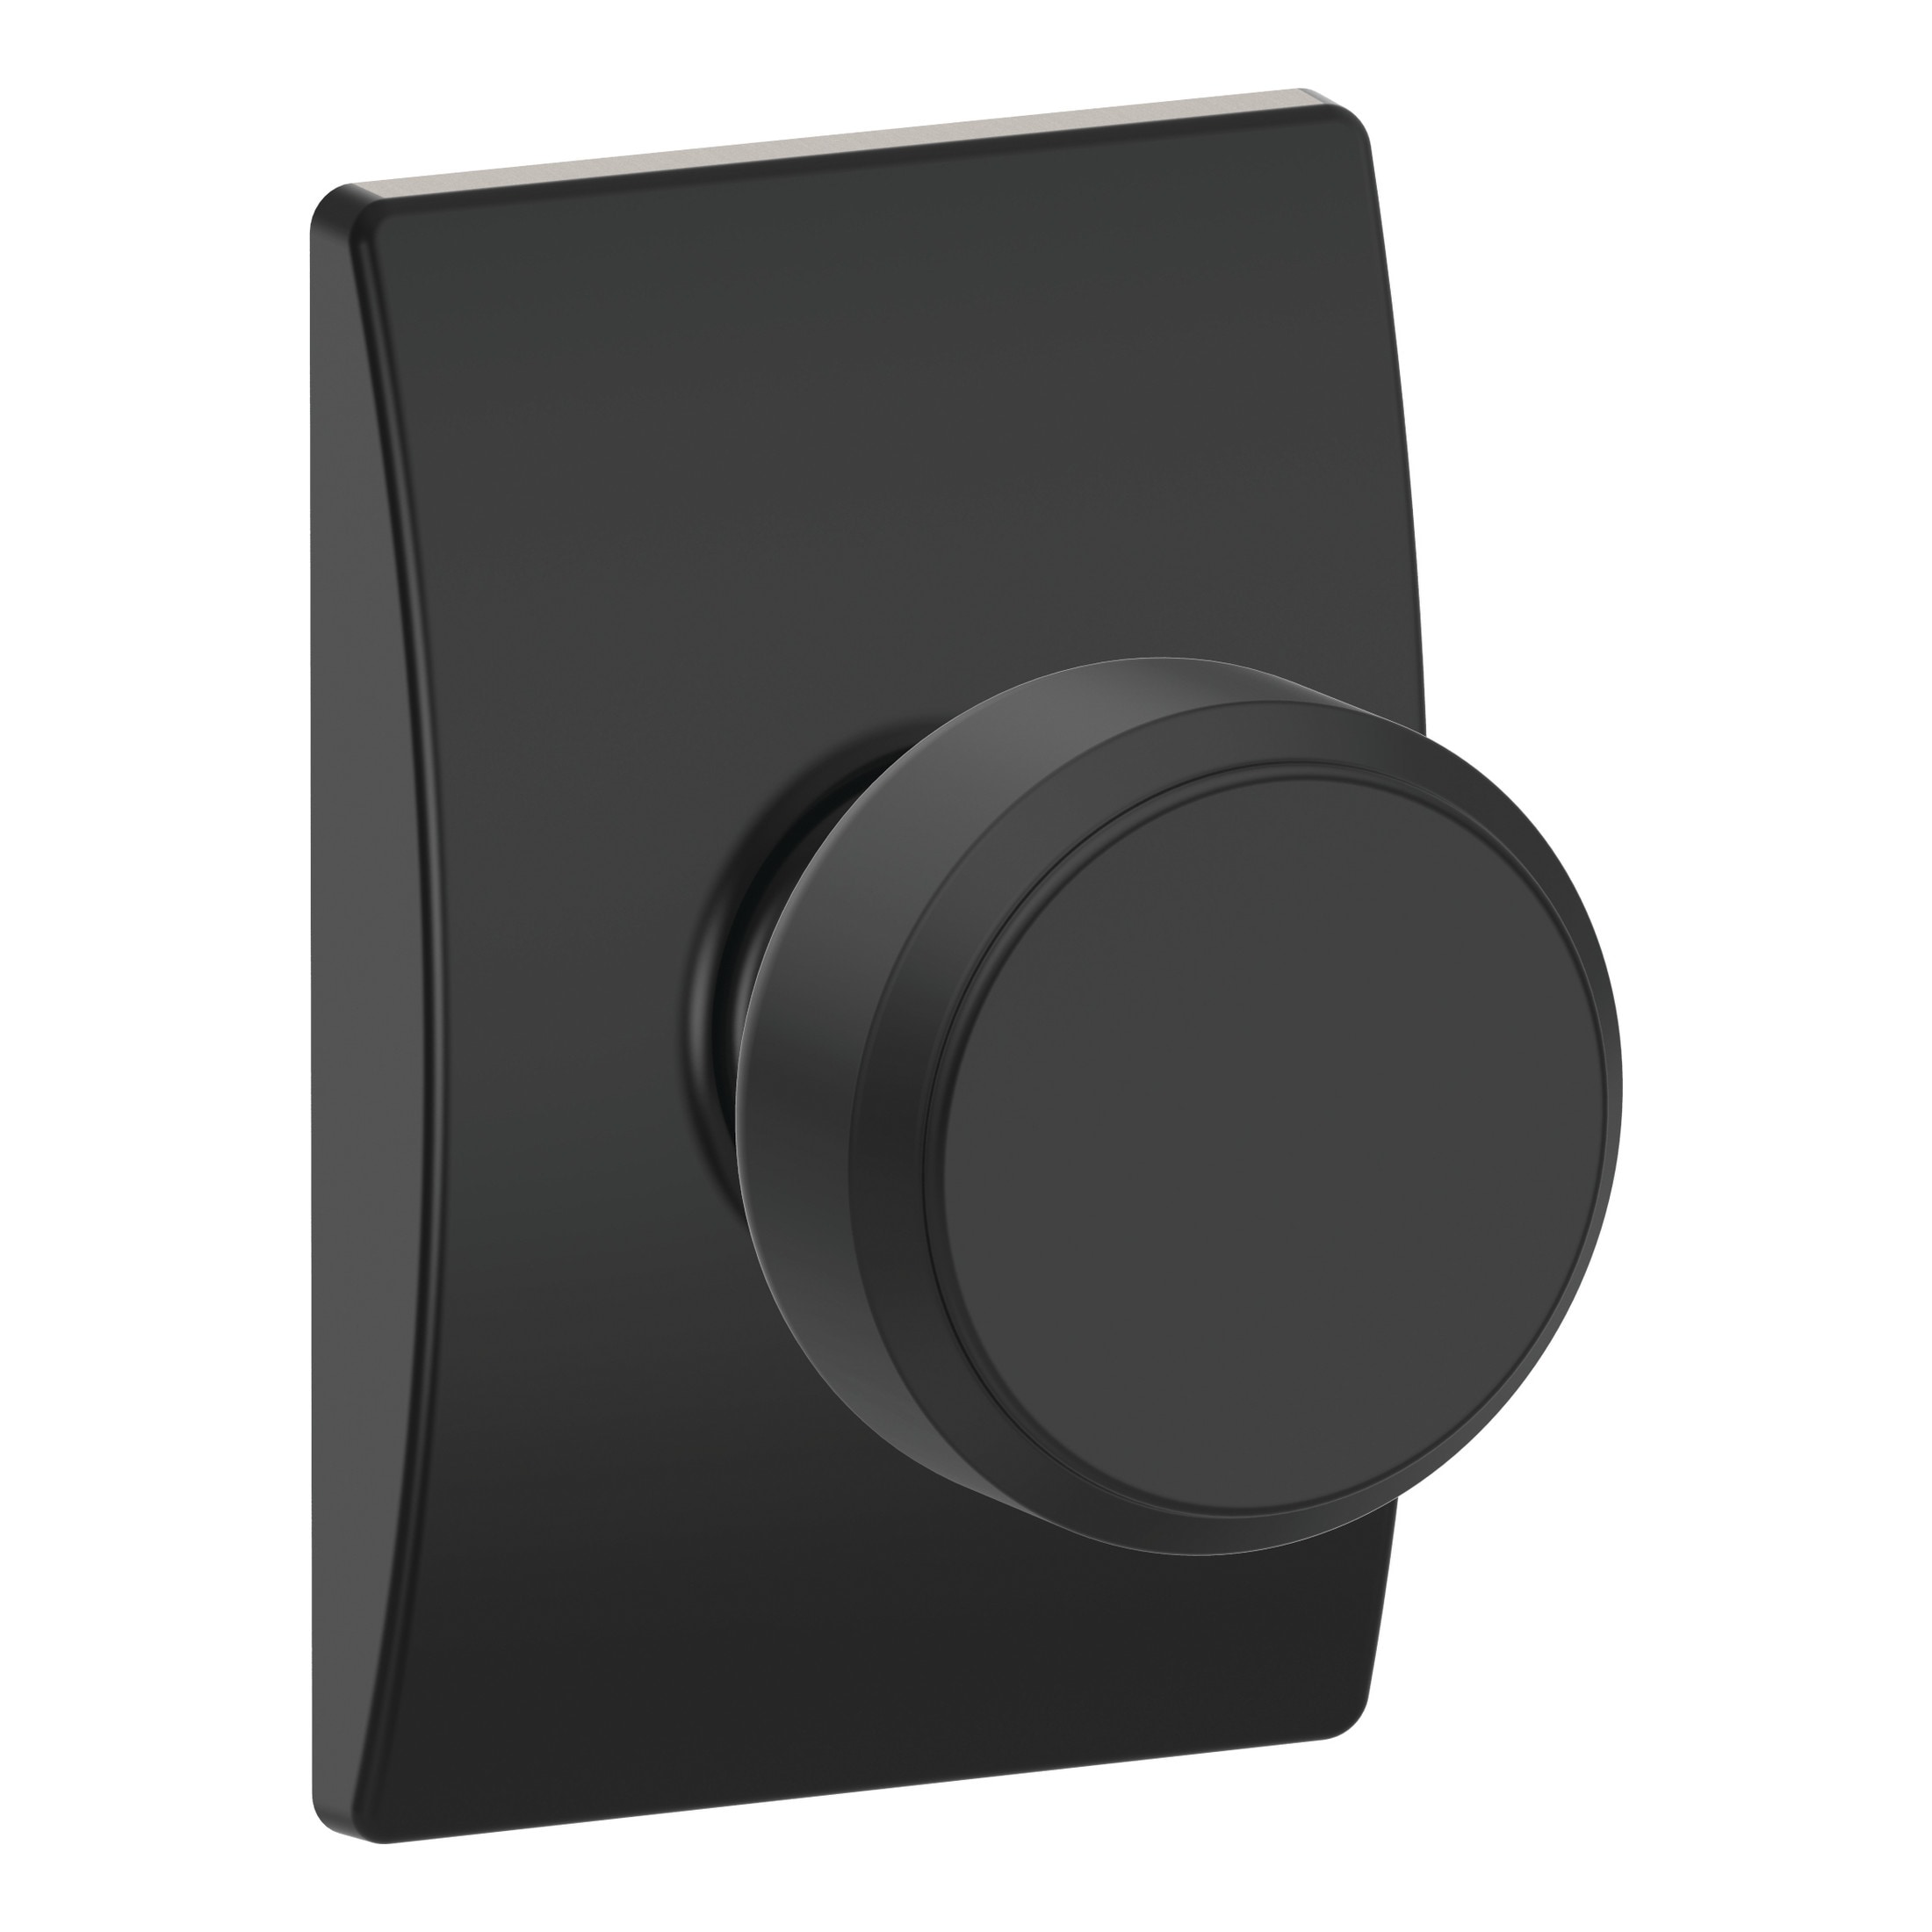 Schlage Bowery Matte Black Steel Entry Knob and Single Cylinder